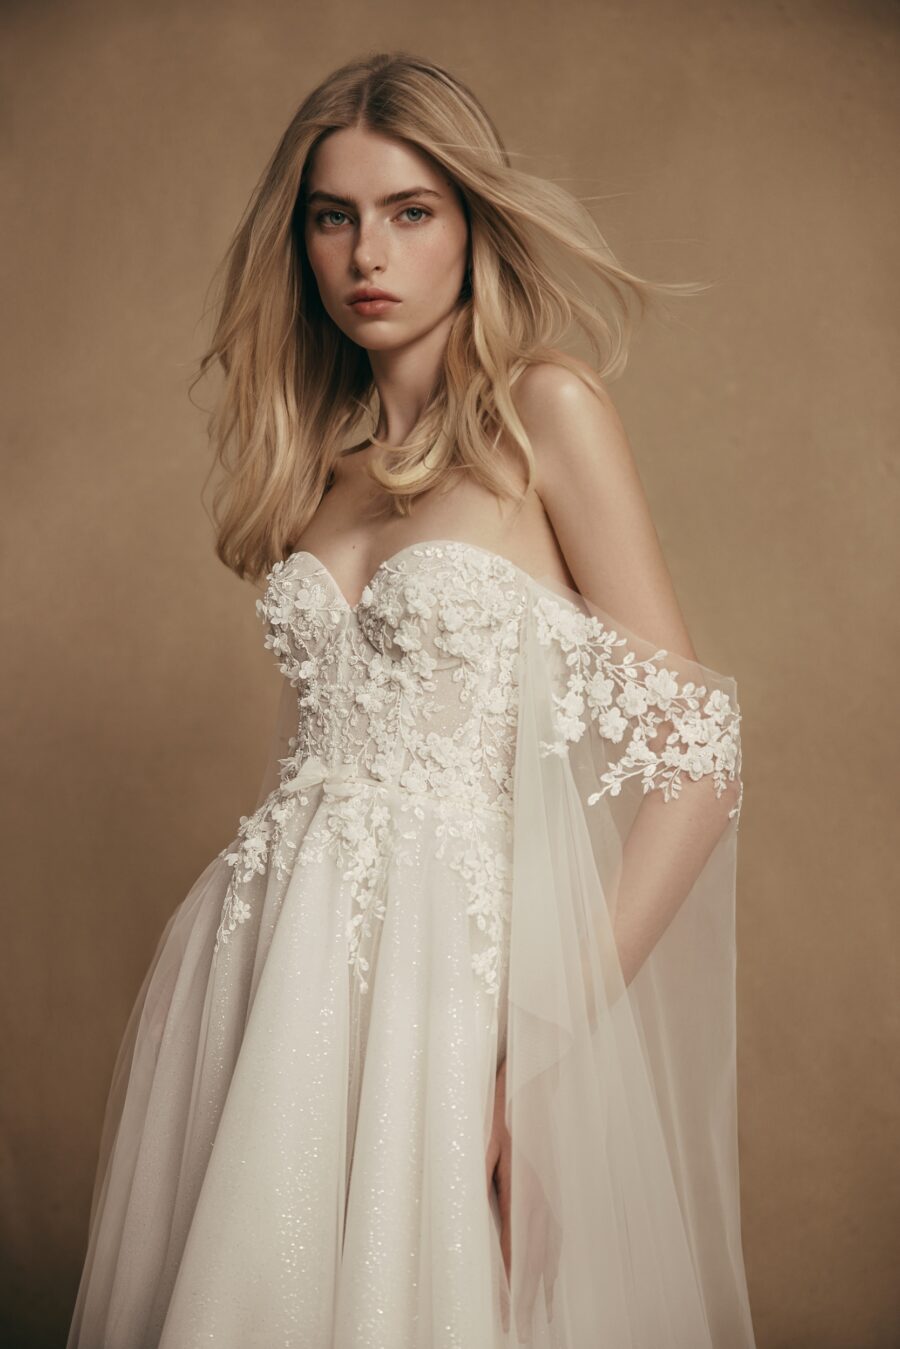 Vita 3 wedding dress by woná concept from personality collection